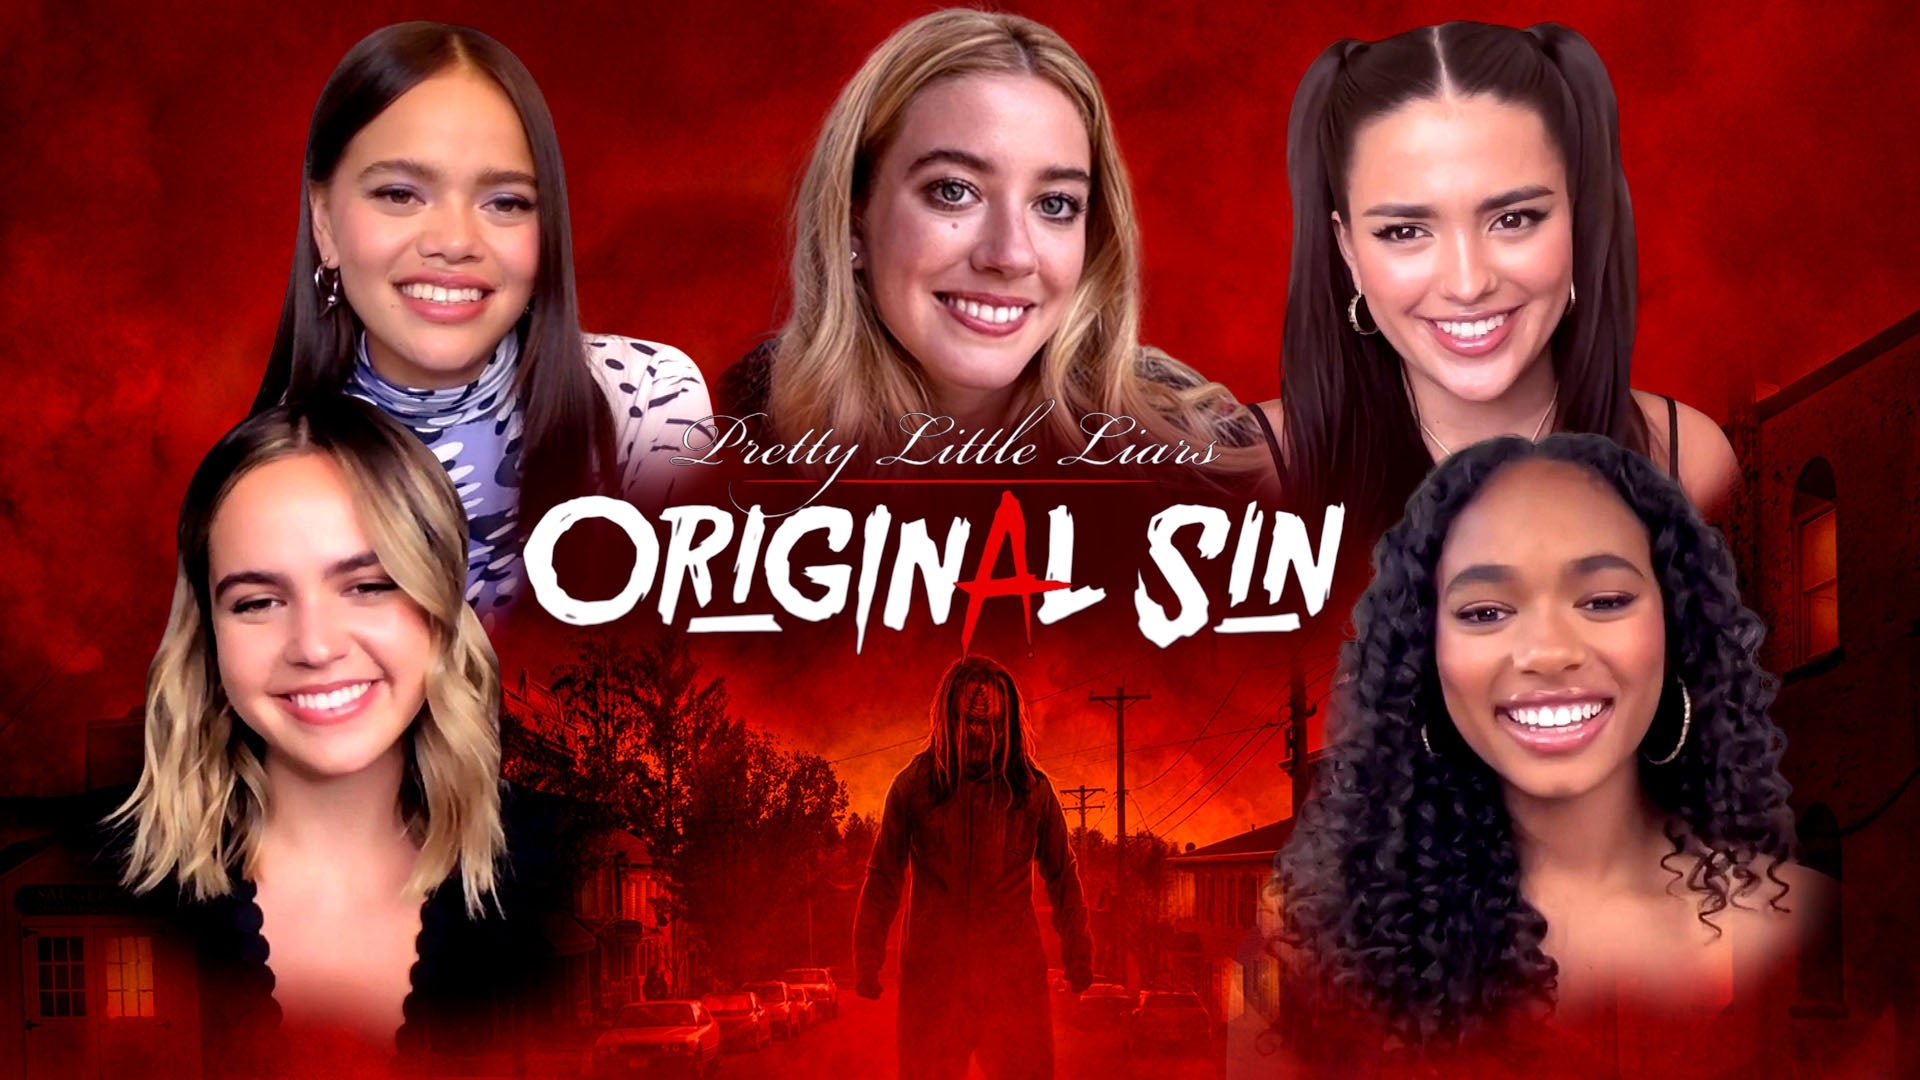 'Pretty Little Liars: Original Sin' Cast on A, Easter Eggs and Cameos From Original Cast (Exclusive)